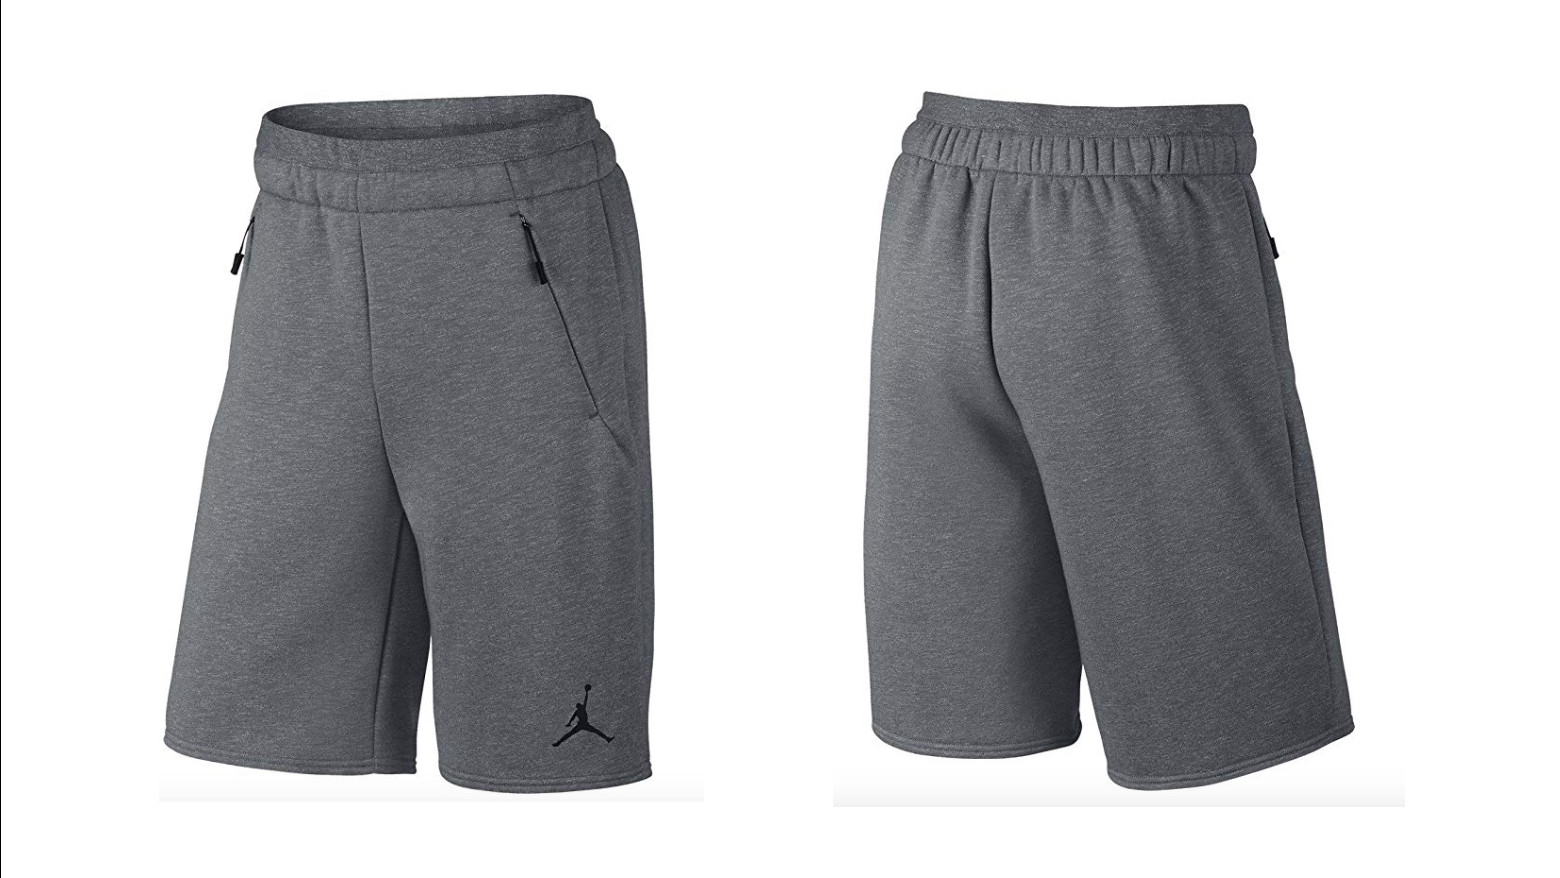 10 Nike Sweatpant Shorts You Need in 